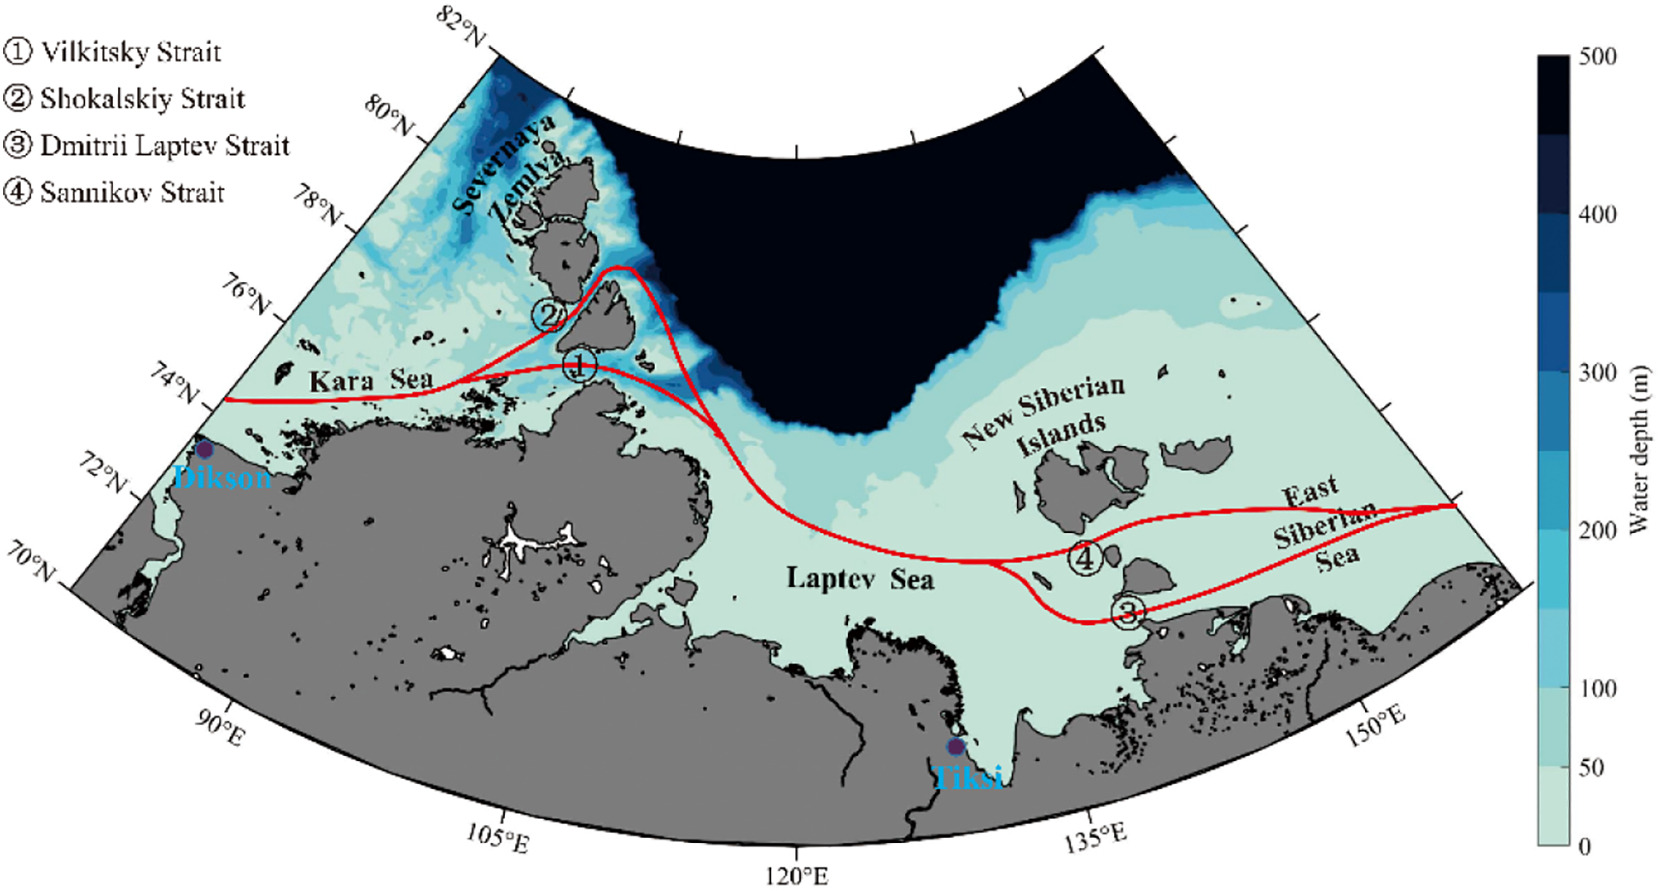 Northeast Passage and surrounding water depth in the Arctic